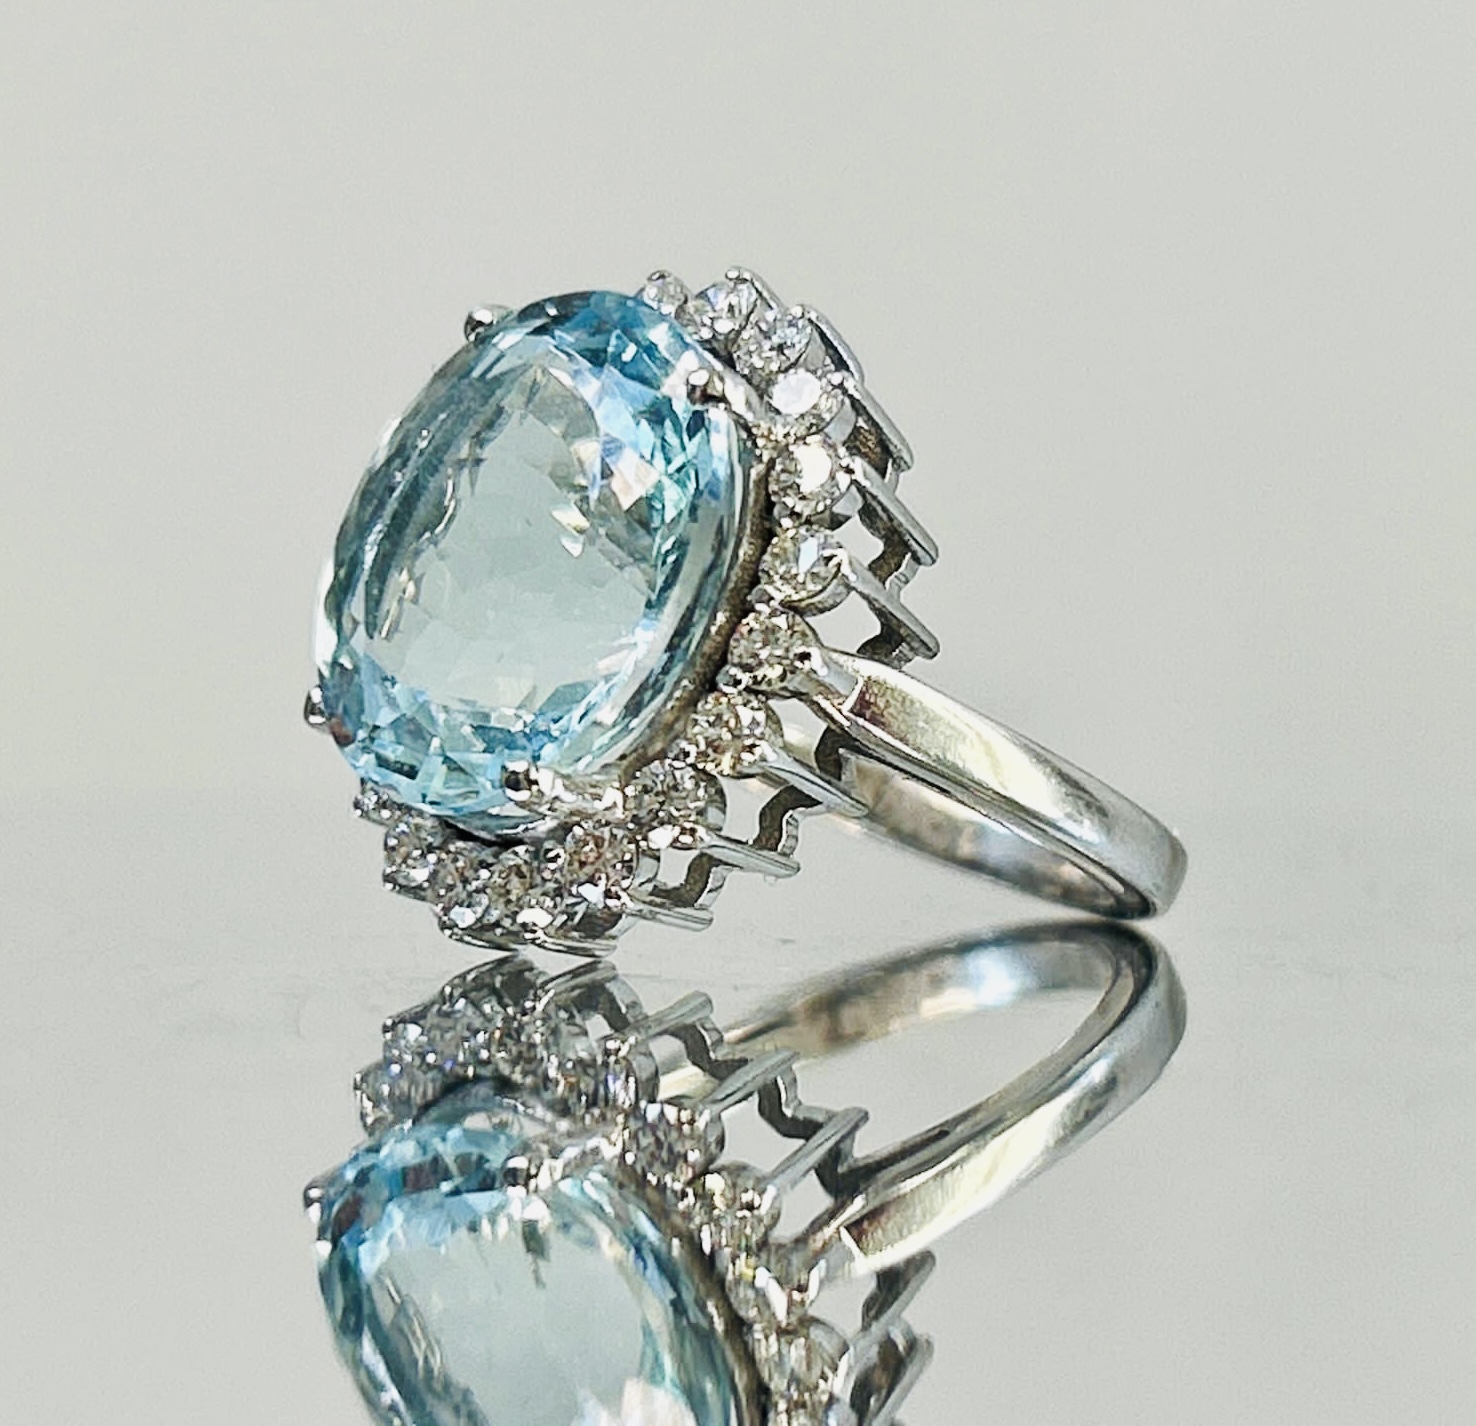 Beautiful Natural Flawless 7.30 CT Aquamarine Ring With Diamonds and 18k Gold - Image 2 of 7